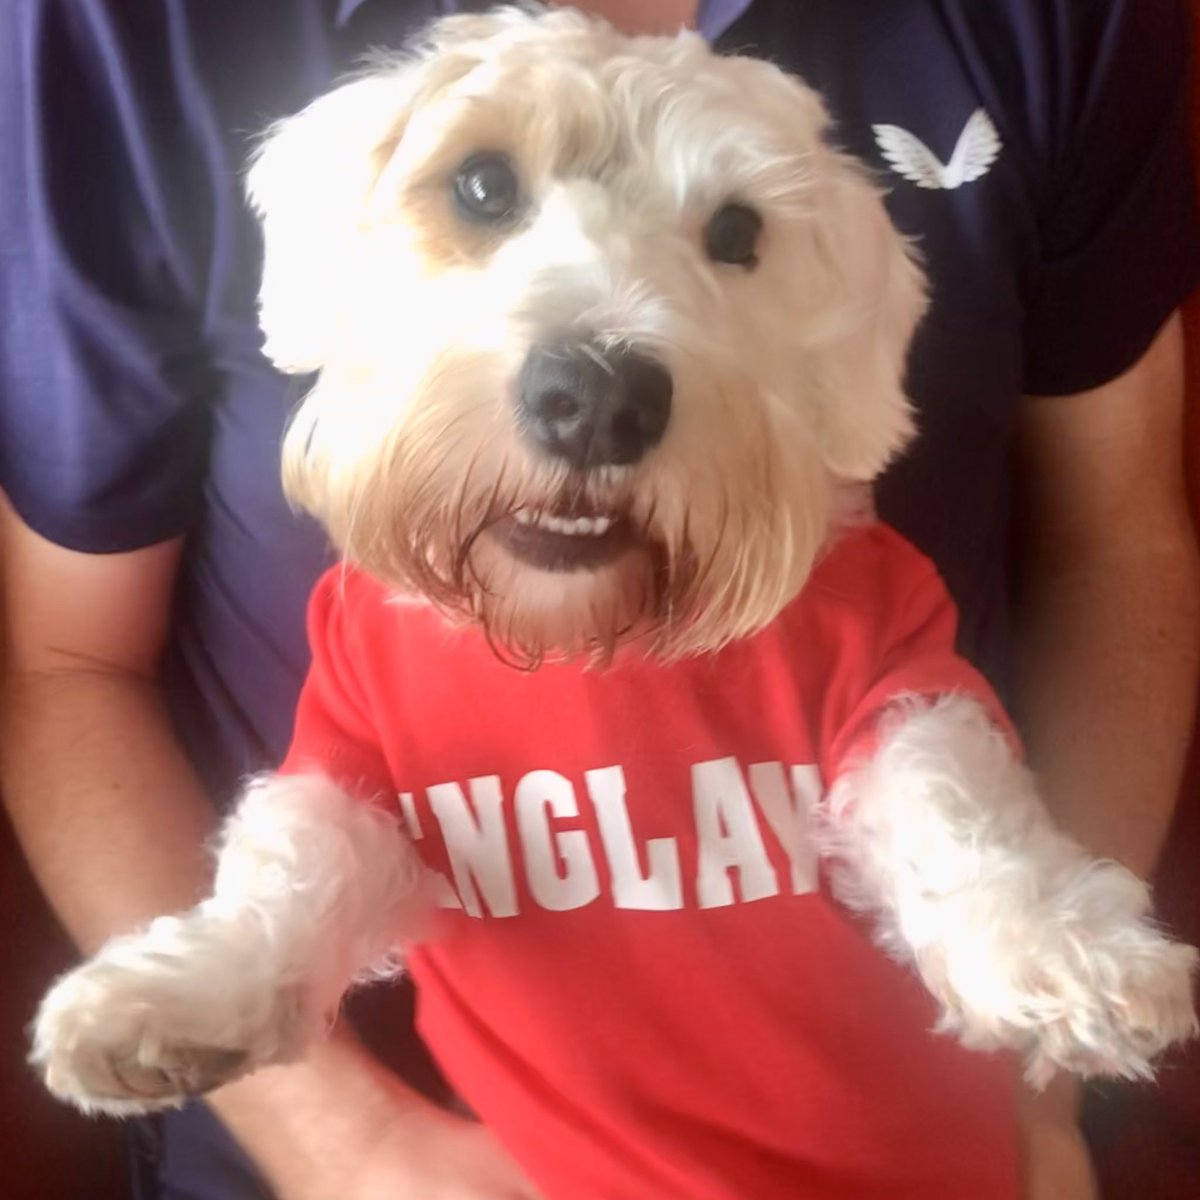 Buffy has now taken over the mascot duties!!! We actually WON!!! 
Well done to #England!!! 😘❤️🐾🏴󠁧󠁢󠁥󠁮󠁧󠁿🏆🎉👏🏻👏🏻#Lionesses #LionessesLive #eng #ENGvsGER #sealyham #WEuro2022Final #Eurofinal ##UEFAWomensEuropeanChampionship #UEFA